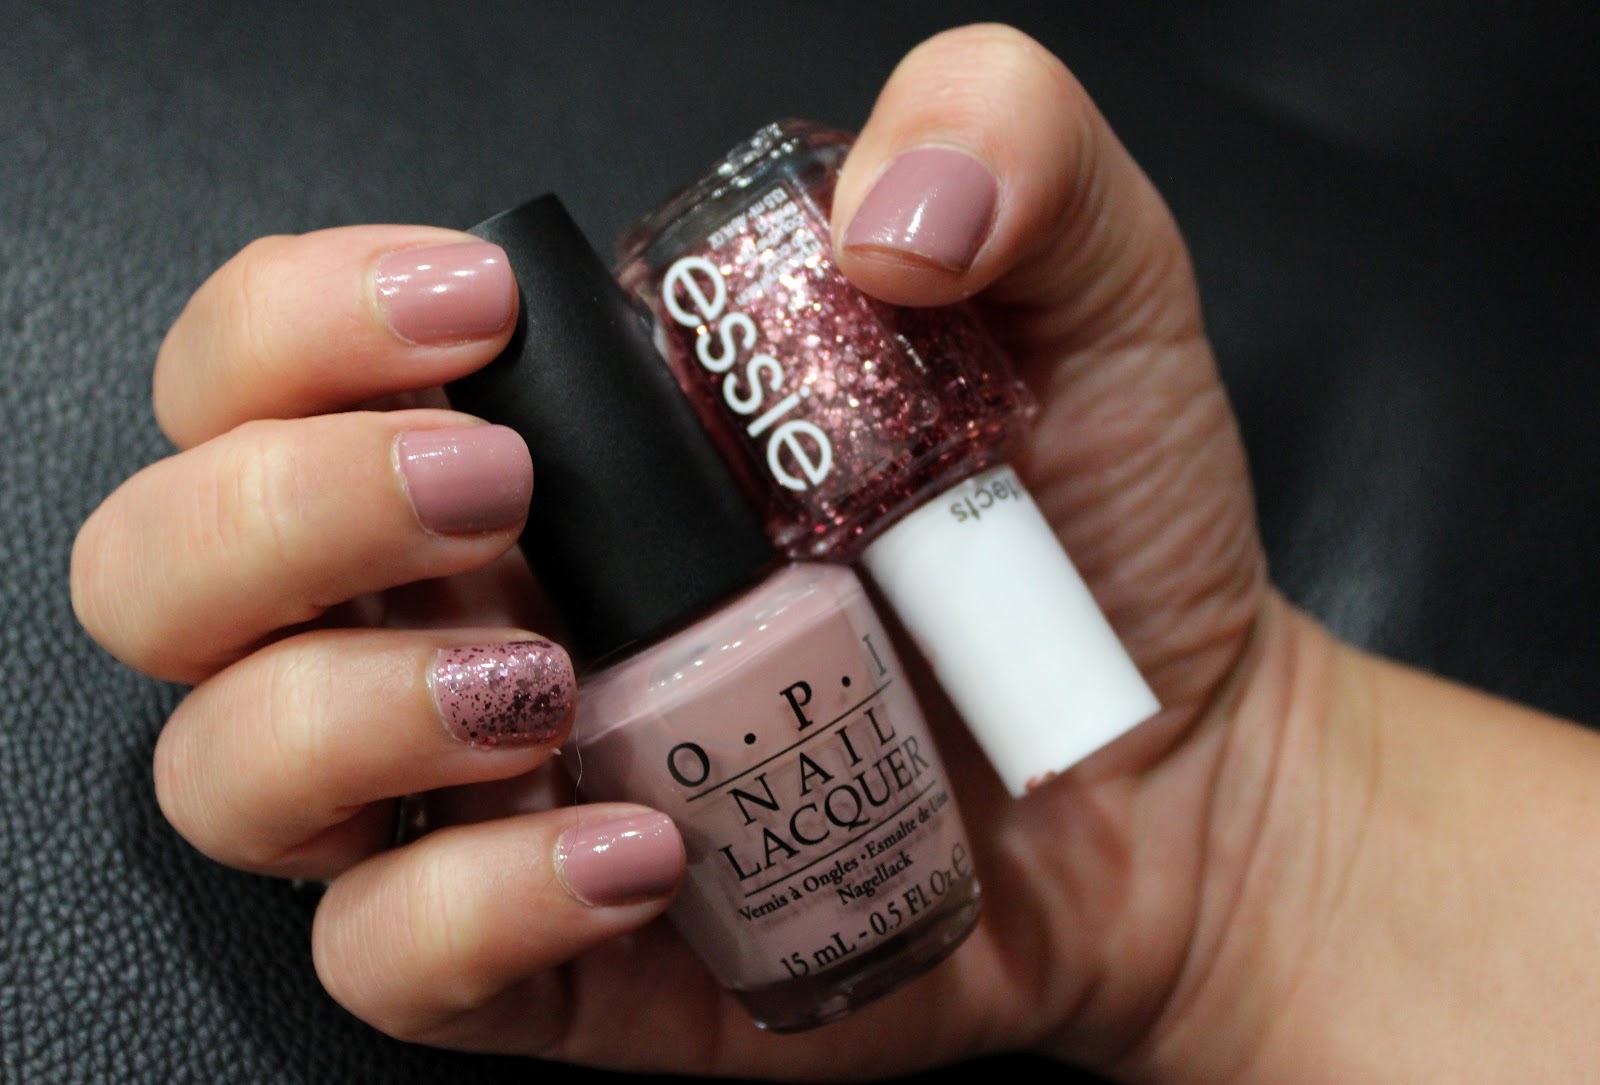 8. OPI GelColor in "Tickle My France-y" - wide 2